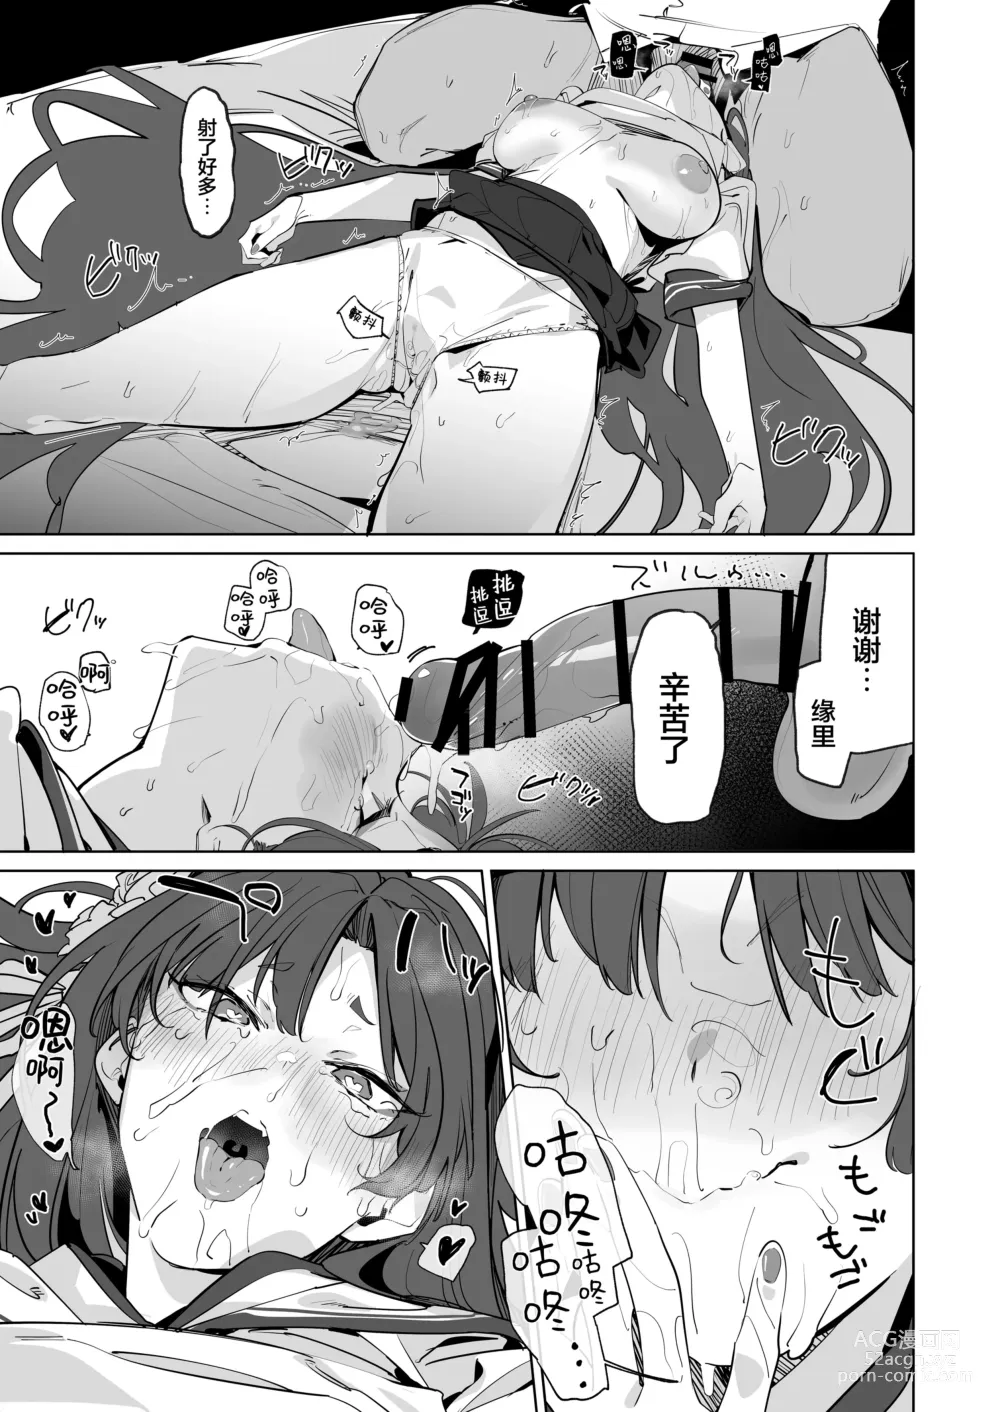 Page 13 of doujinshi 今日也请多多指导在下